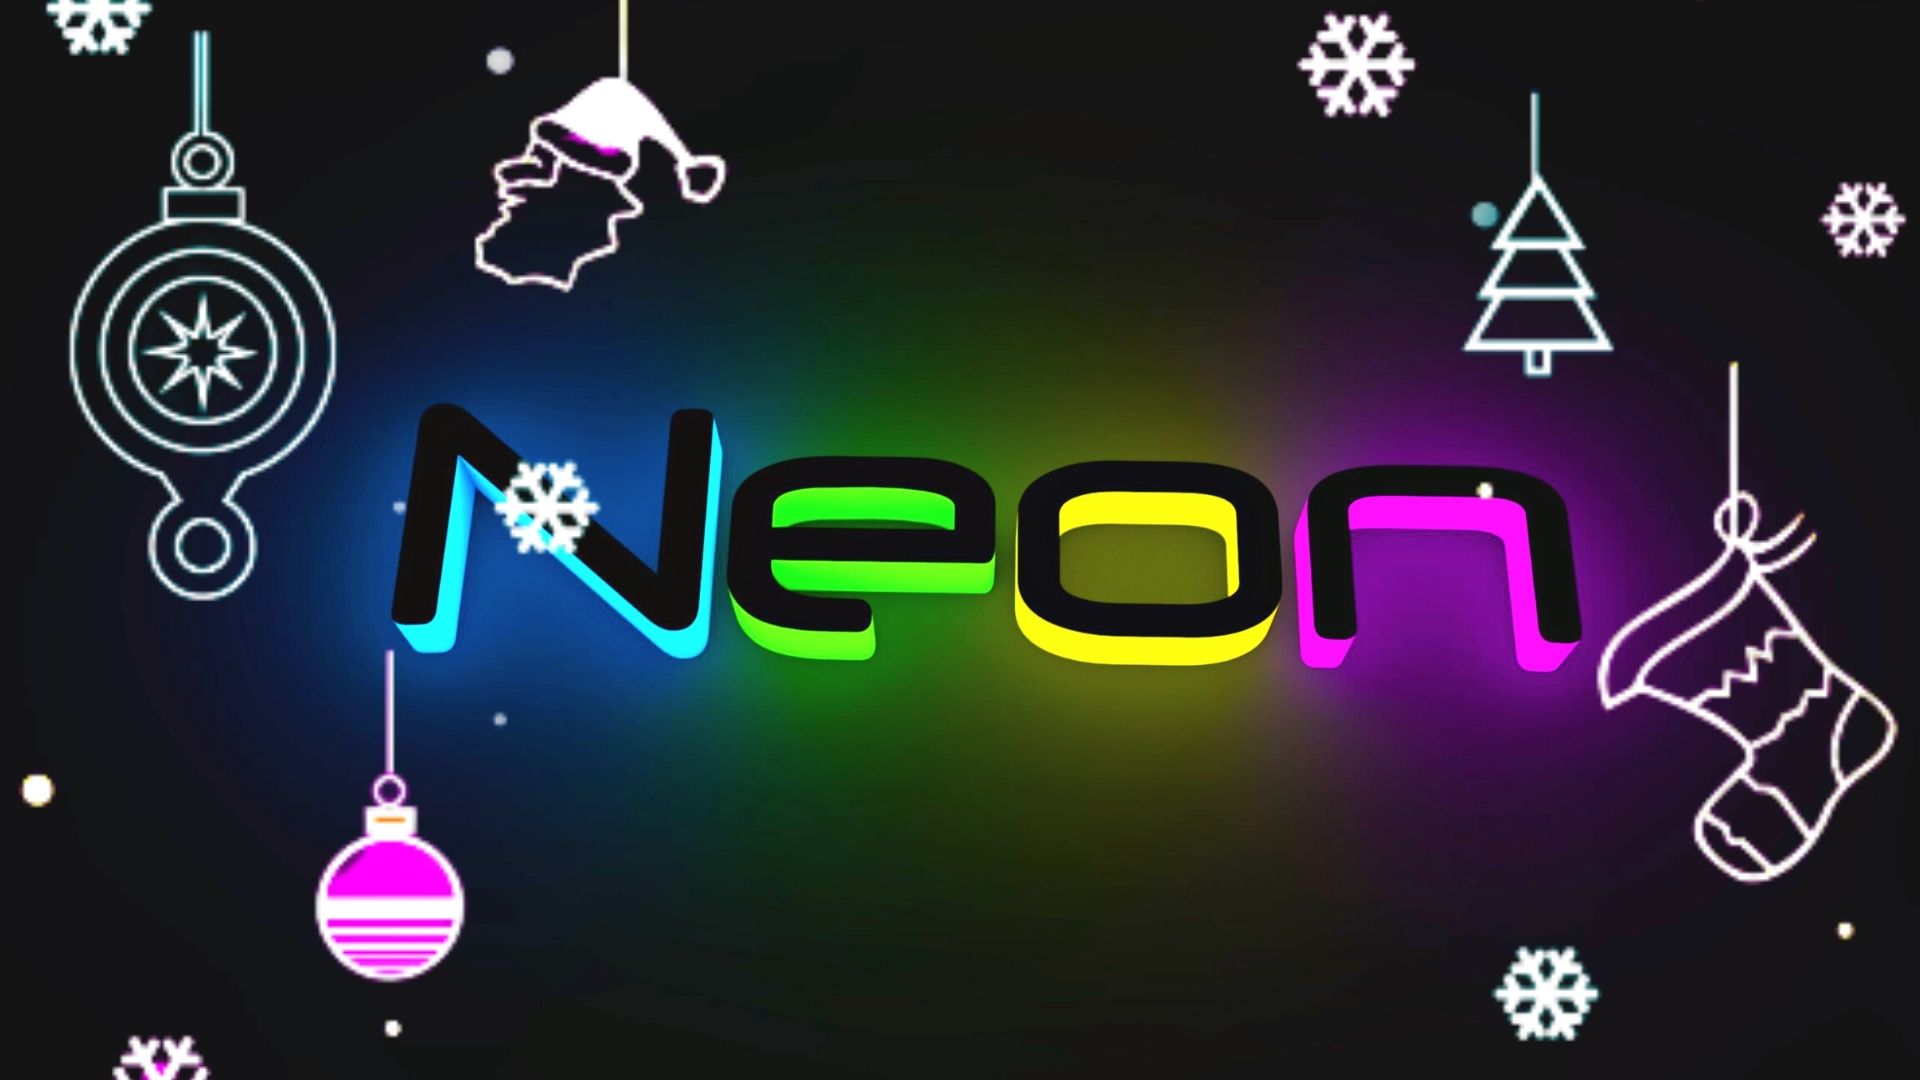 The 20 Interesting Facts About Neon You Need To Know